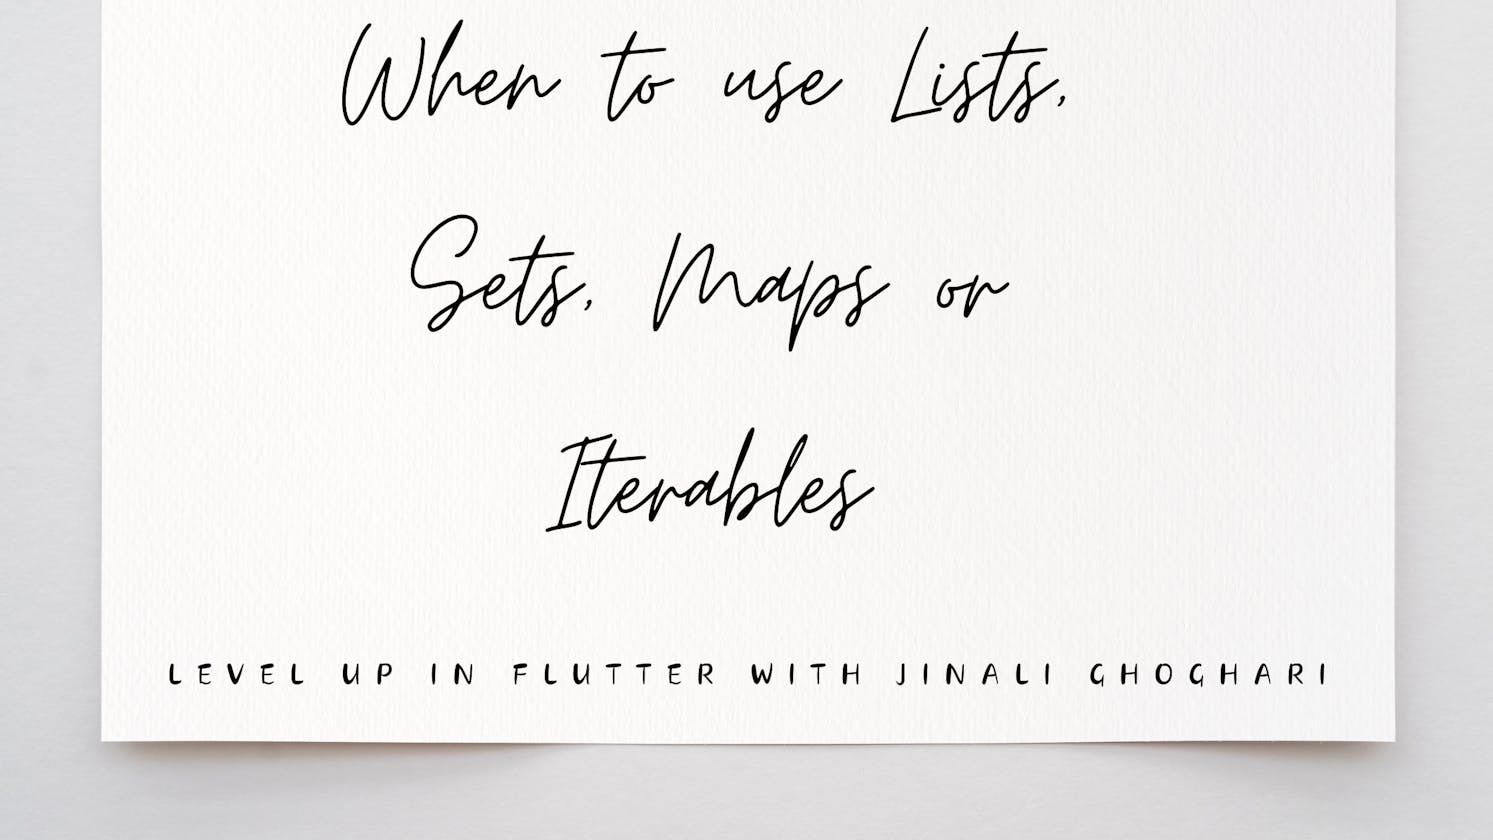 When to use Lists, Sets, Maps or Iterables